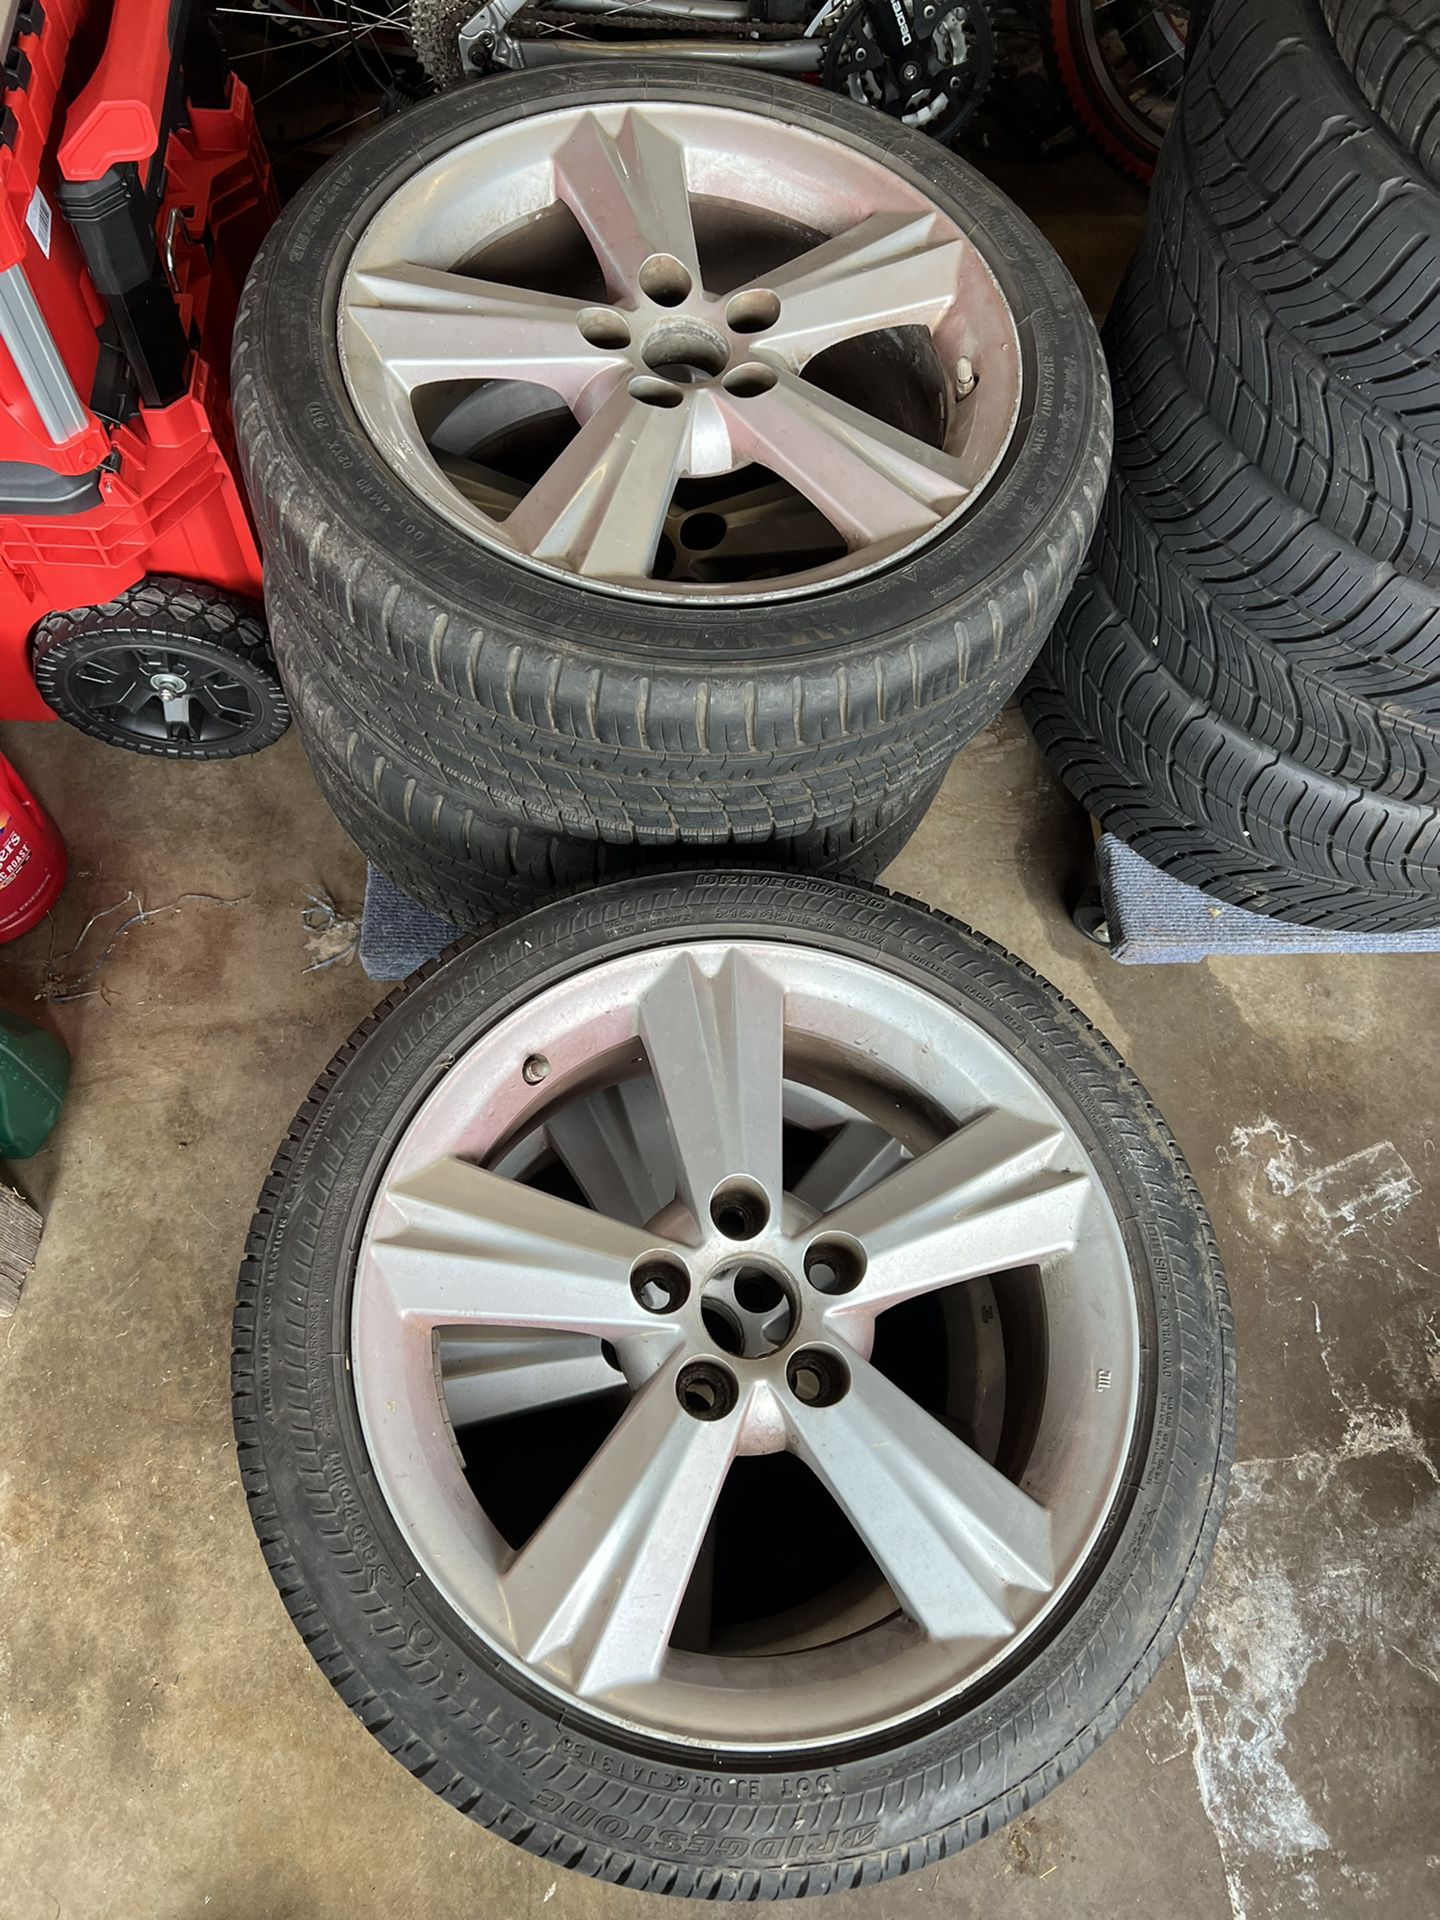 215/45r17 On 5x114’s With An Extra Rim